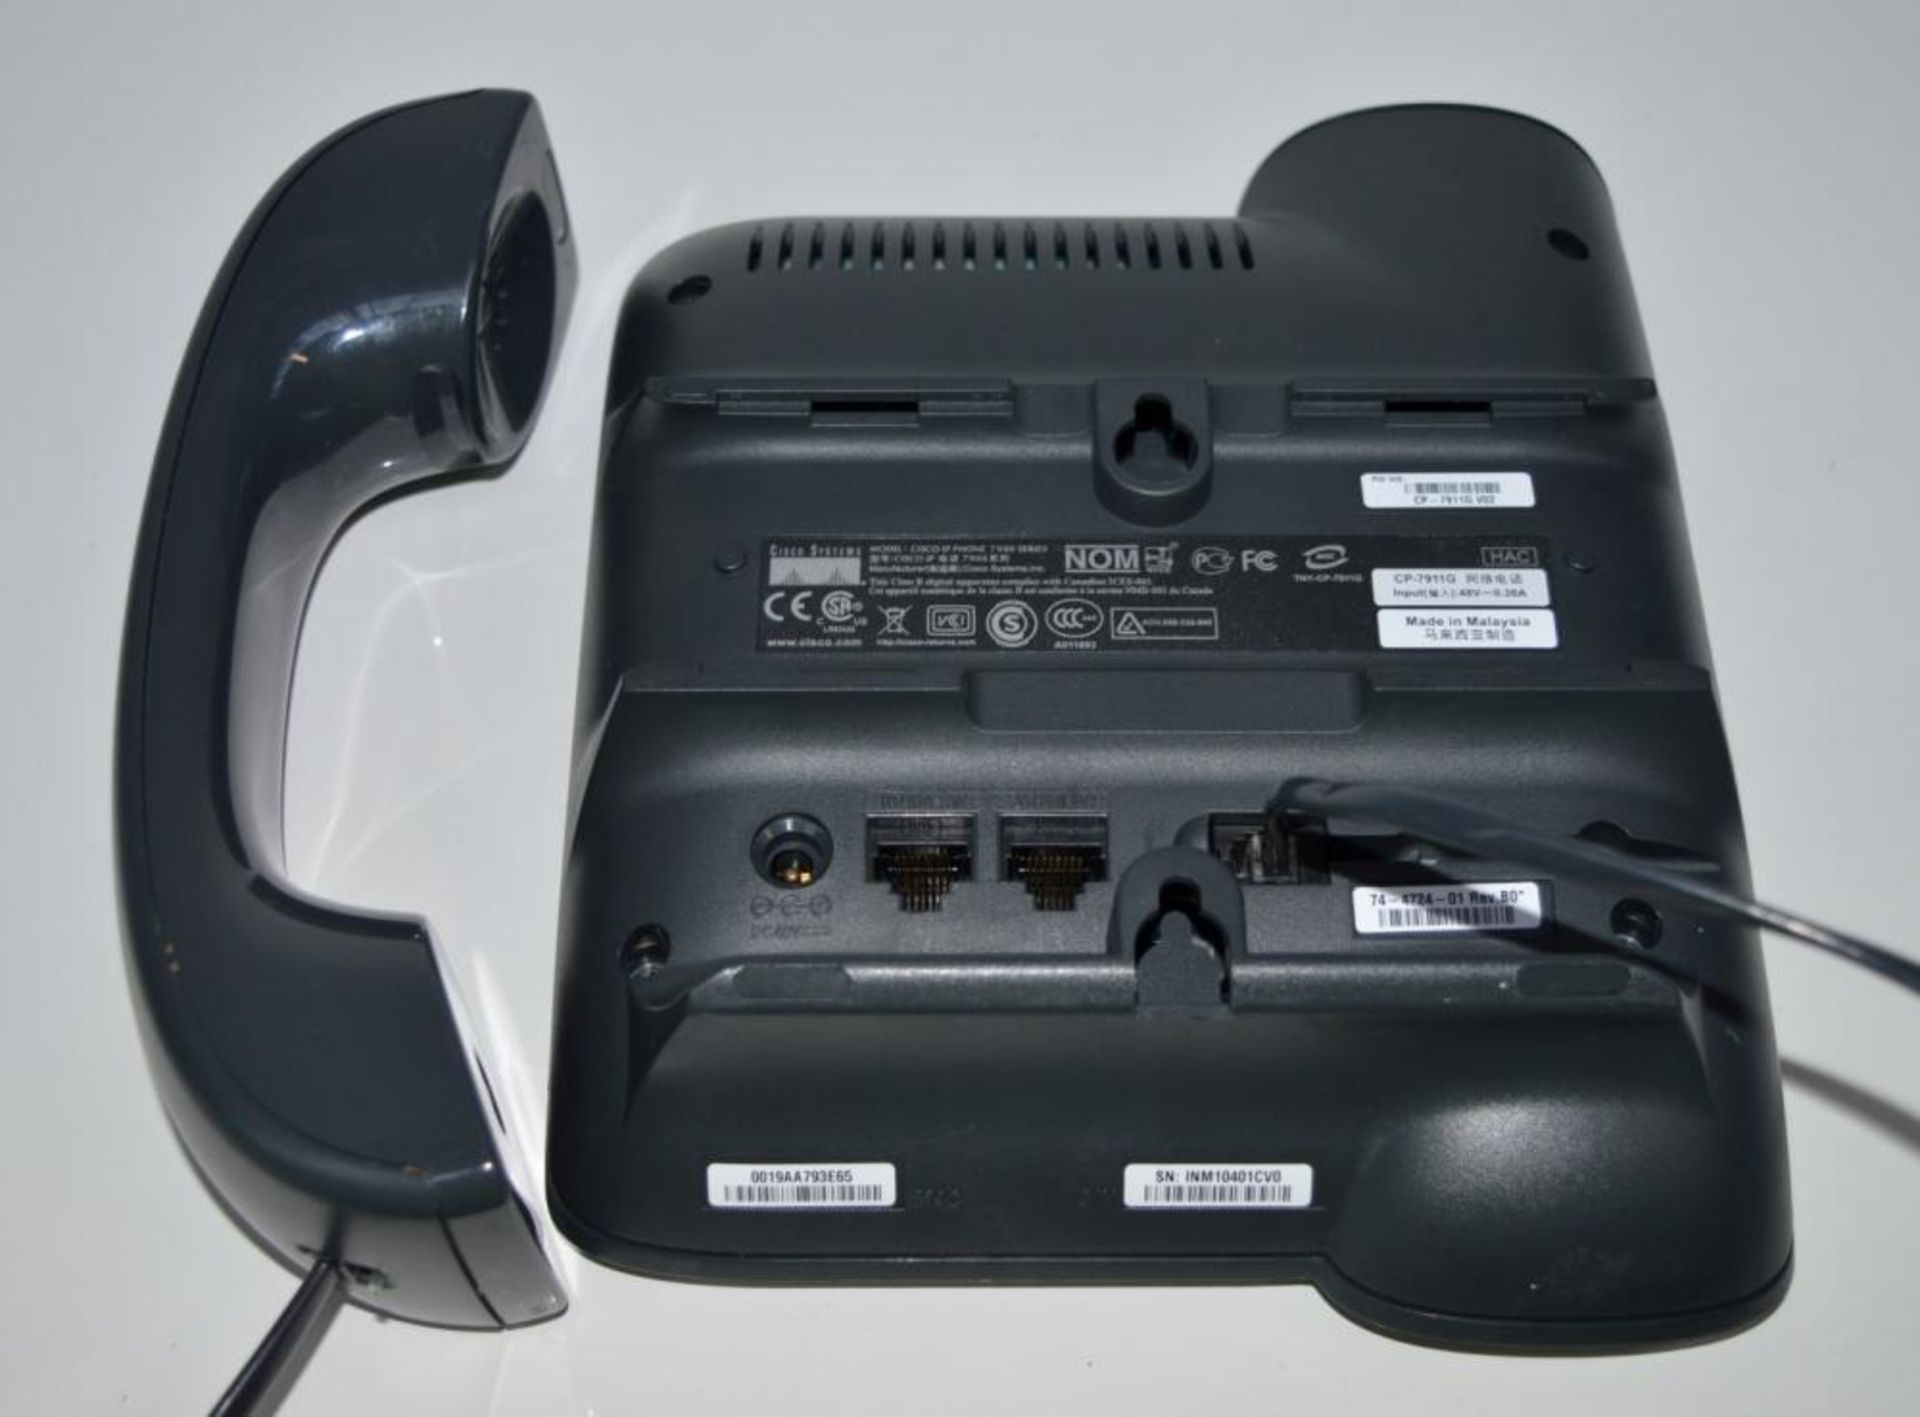 4 x Cisco CP-7911G Unified IP SIP Phones - Removed From a Working Office Environment in Good - Image 7 of 8